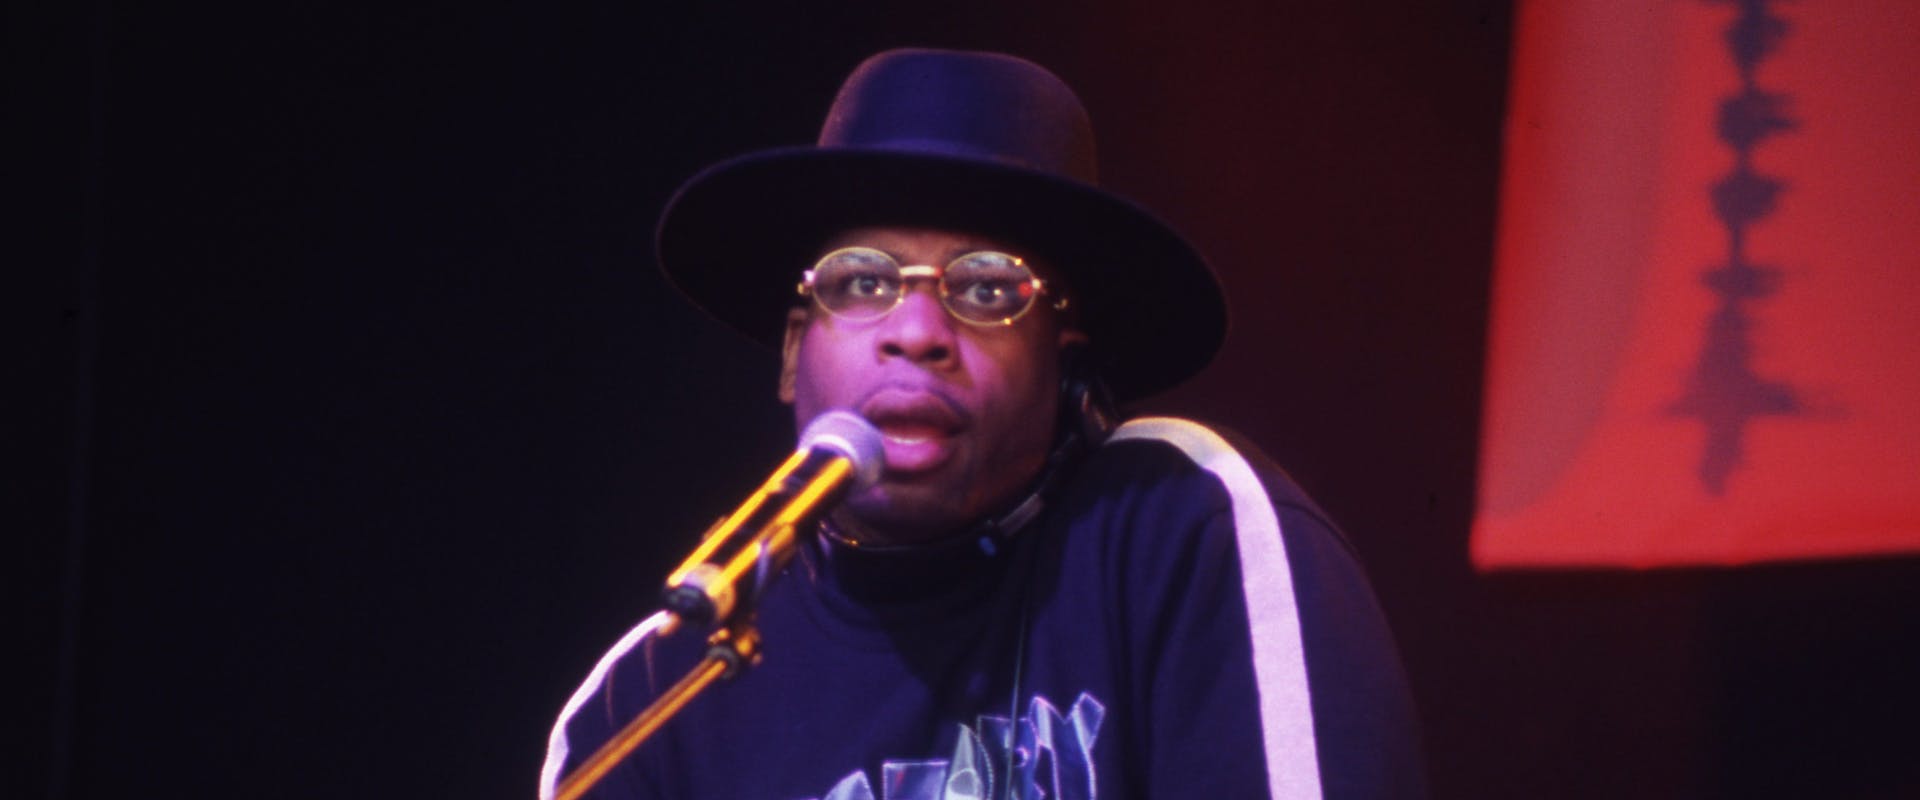 Jam Master Jay of Run DMC performs on stage at the Respect Festival, Finsbury Park, London, United Kingdom, 2001